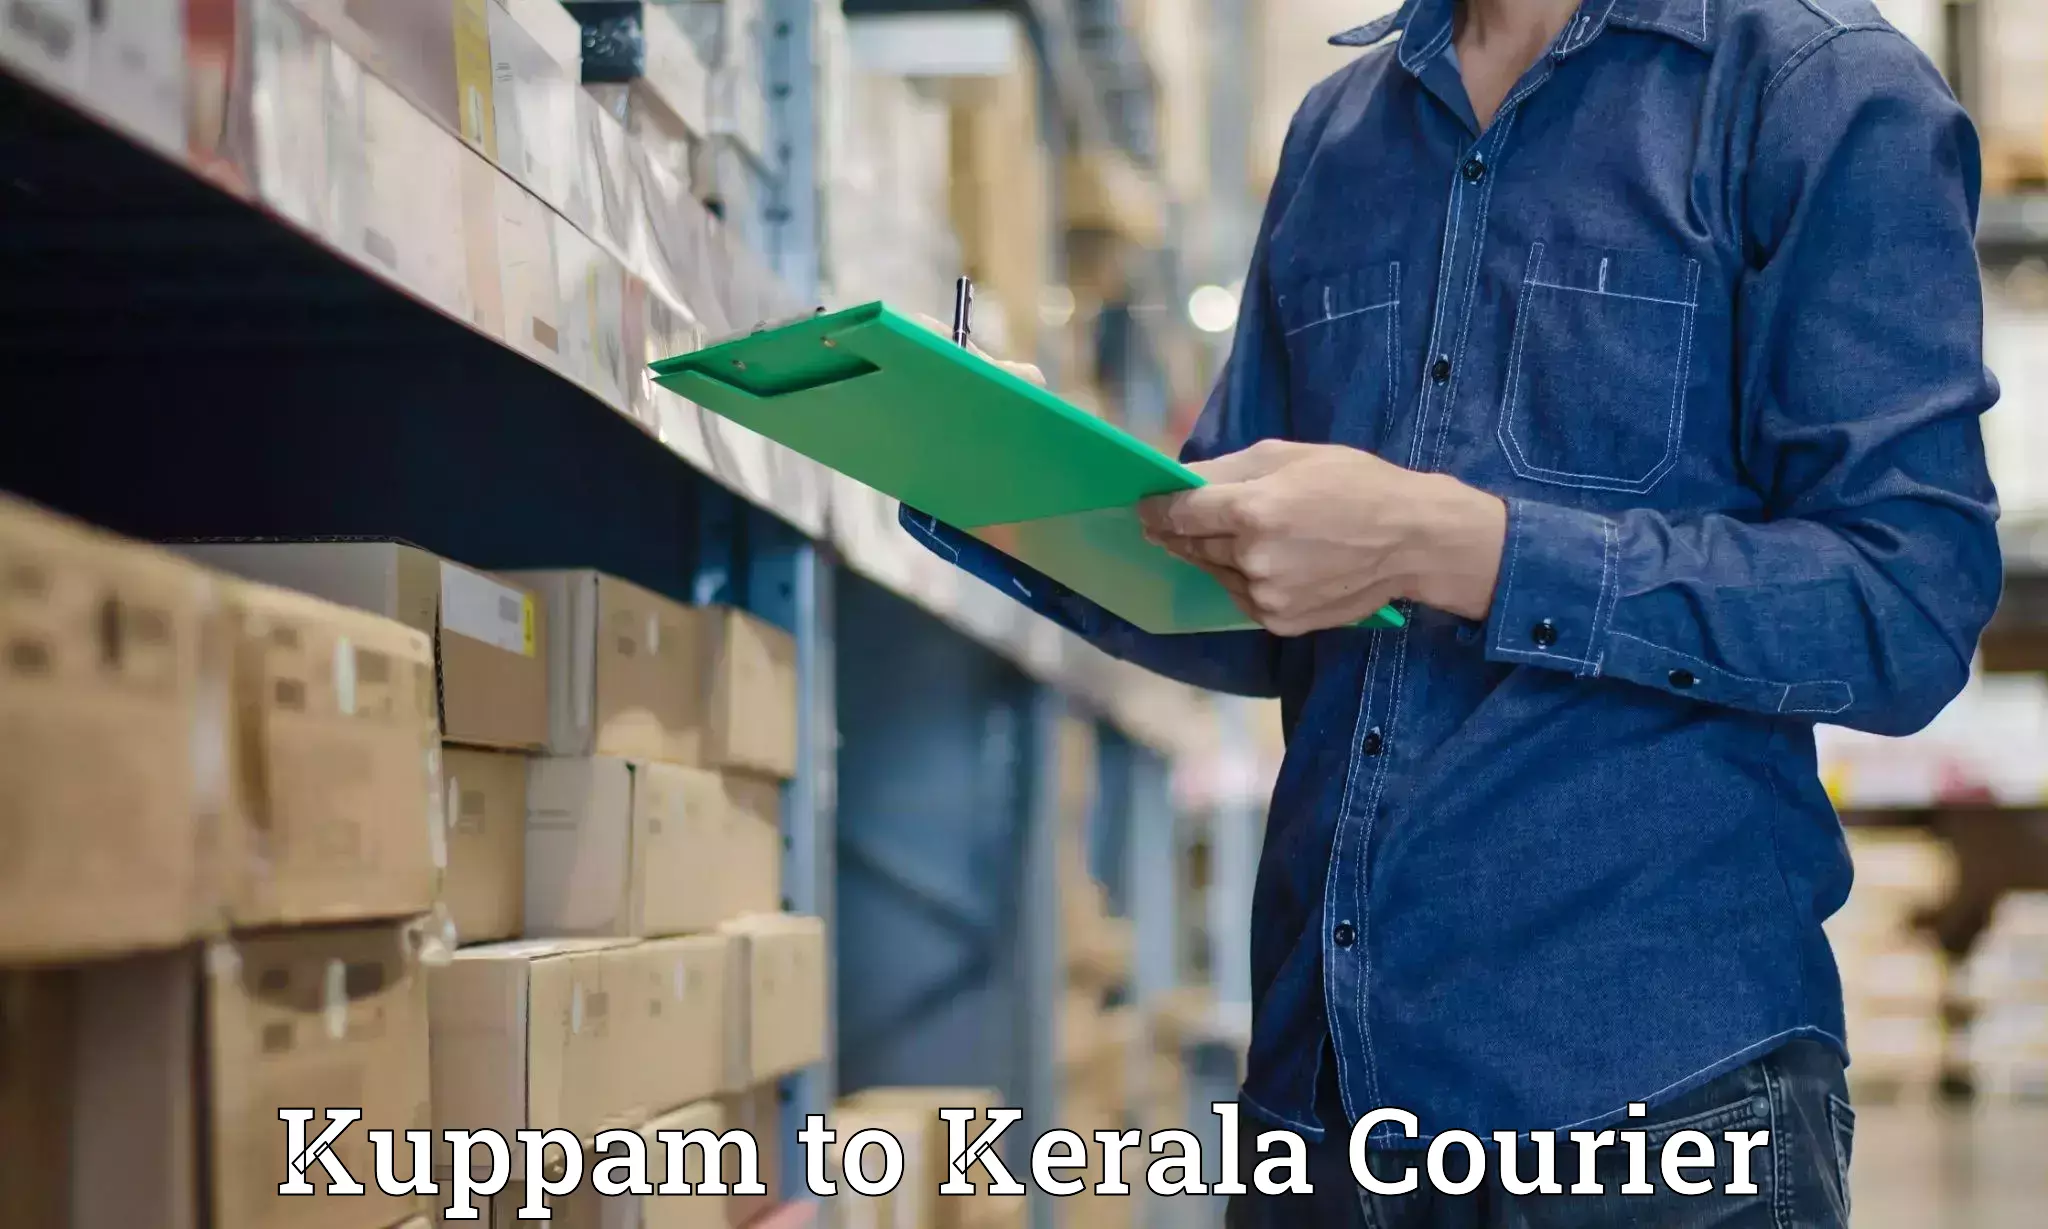 Express delivery network Kuppam to Kerala